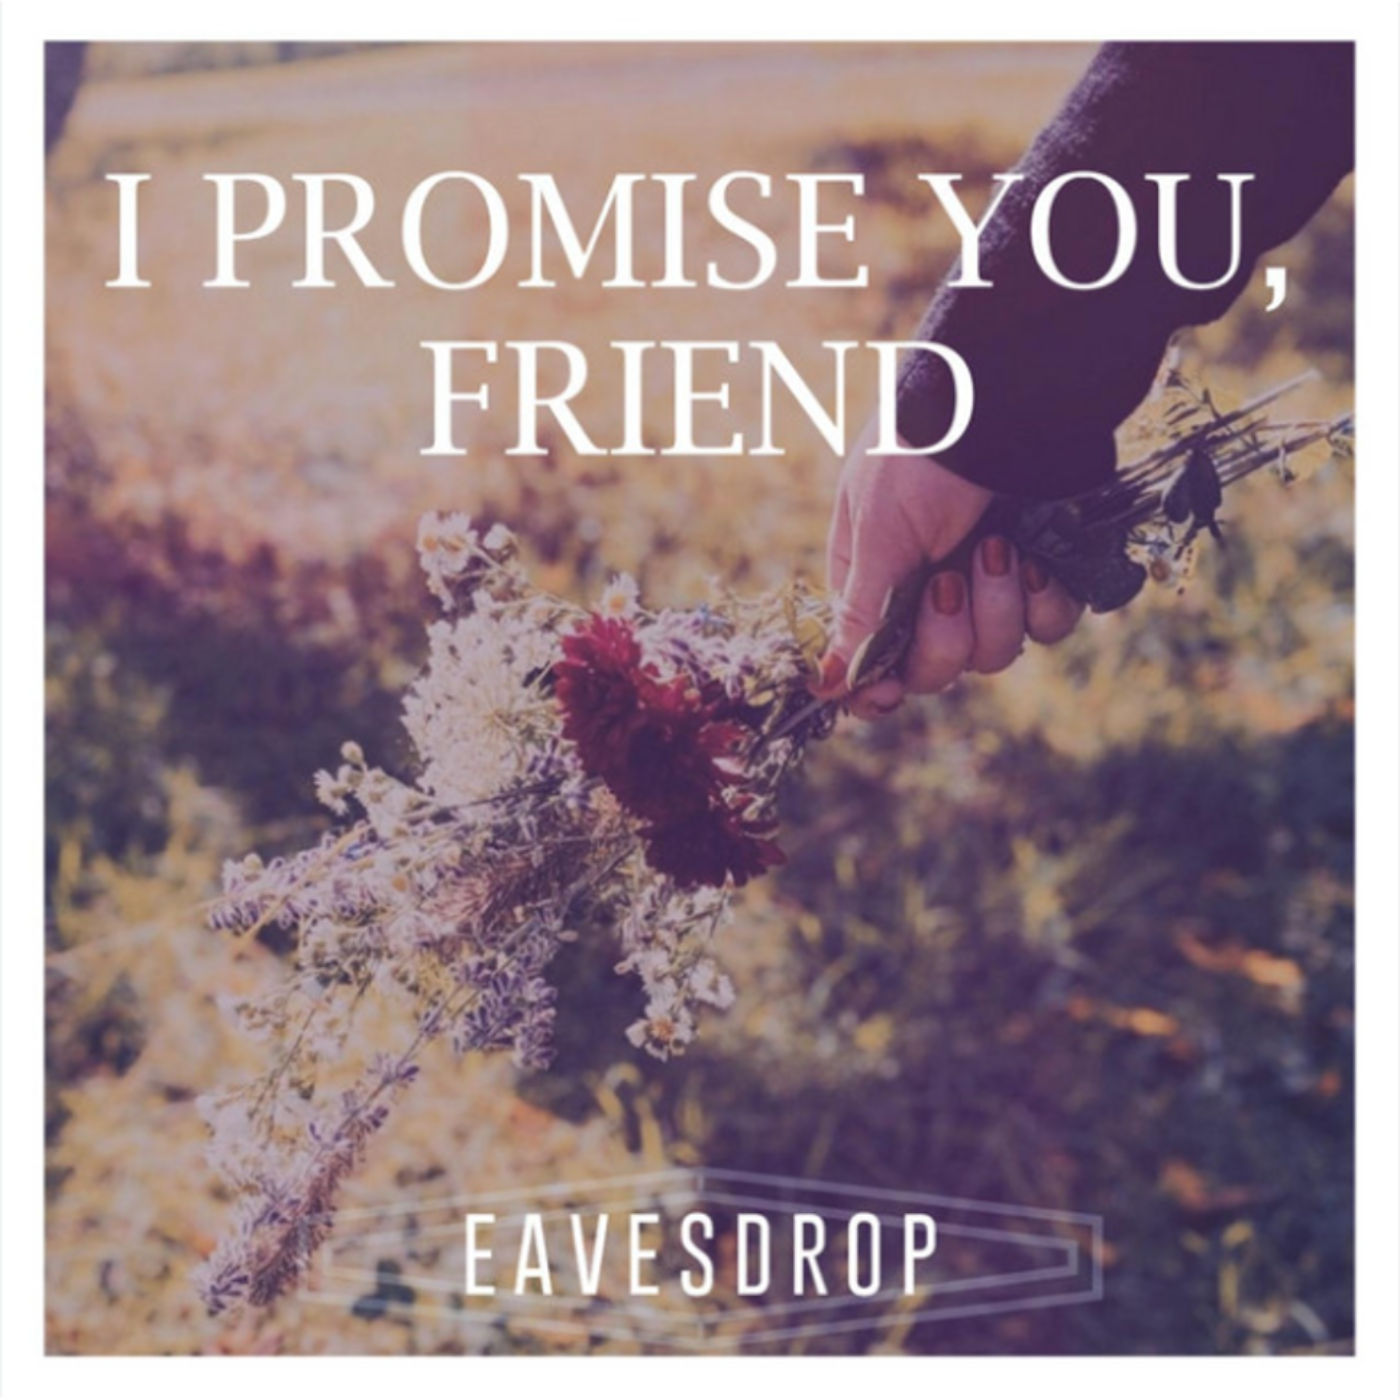 I Promise You, Friend (SINGLE RELEASE) © 2019